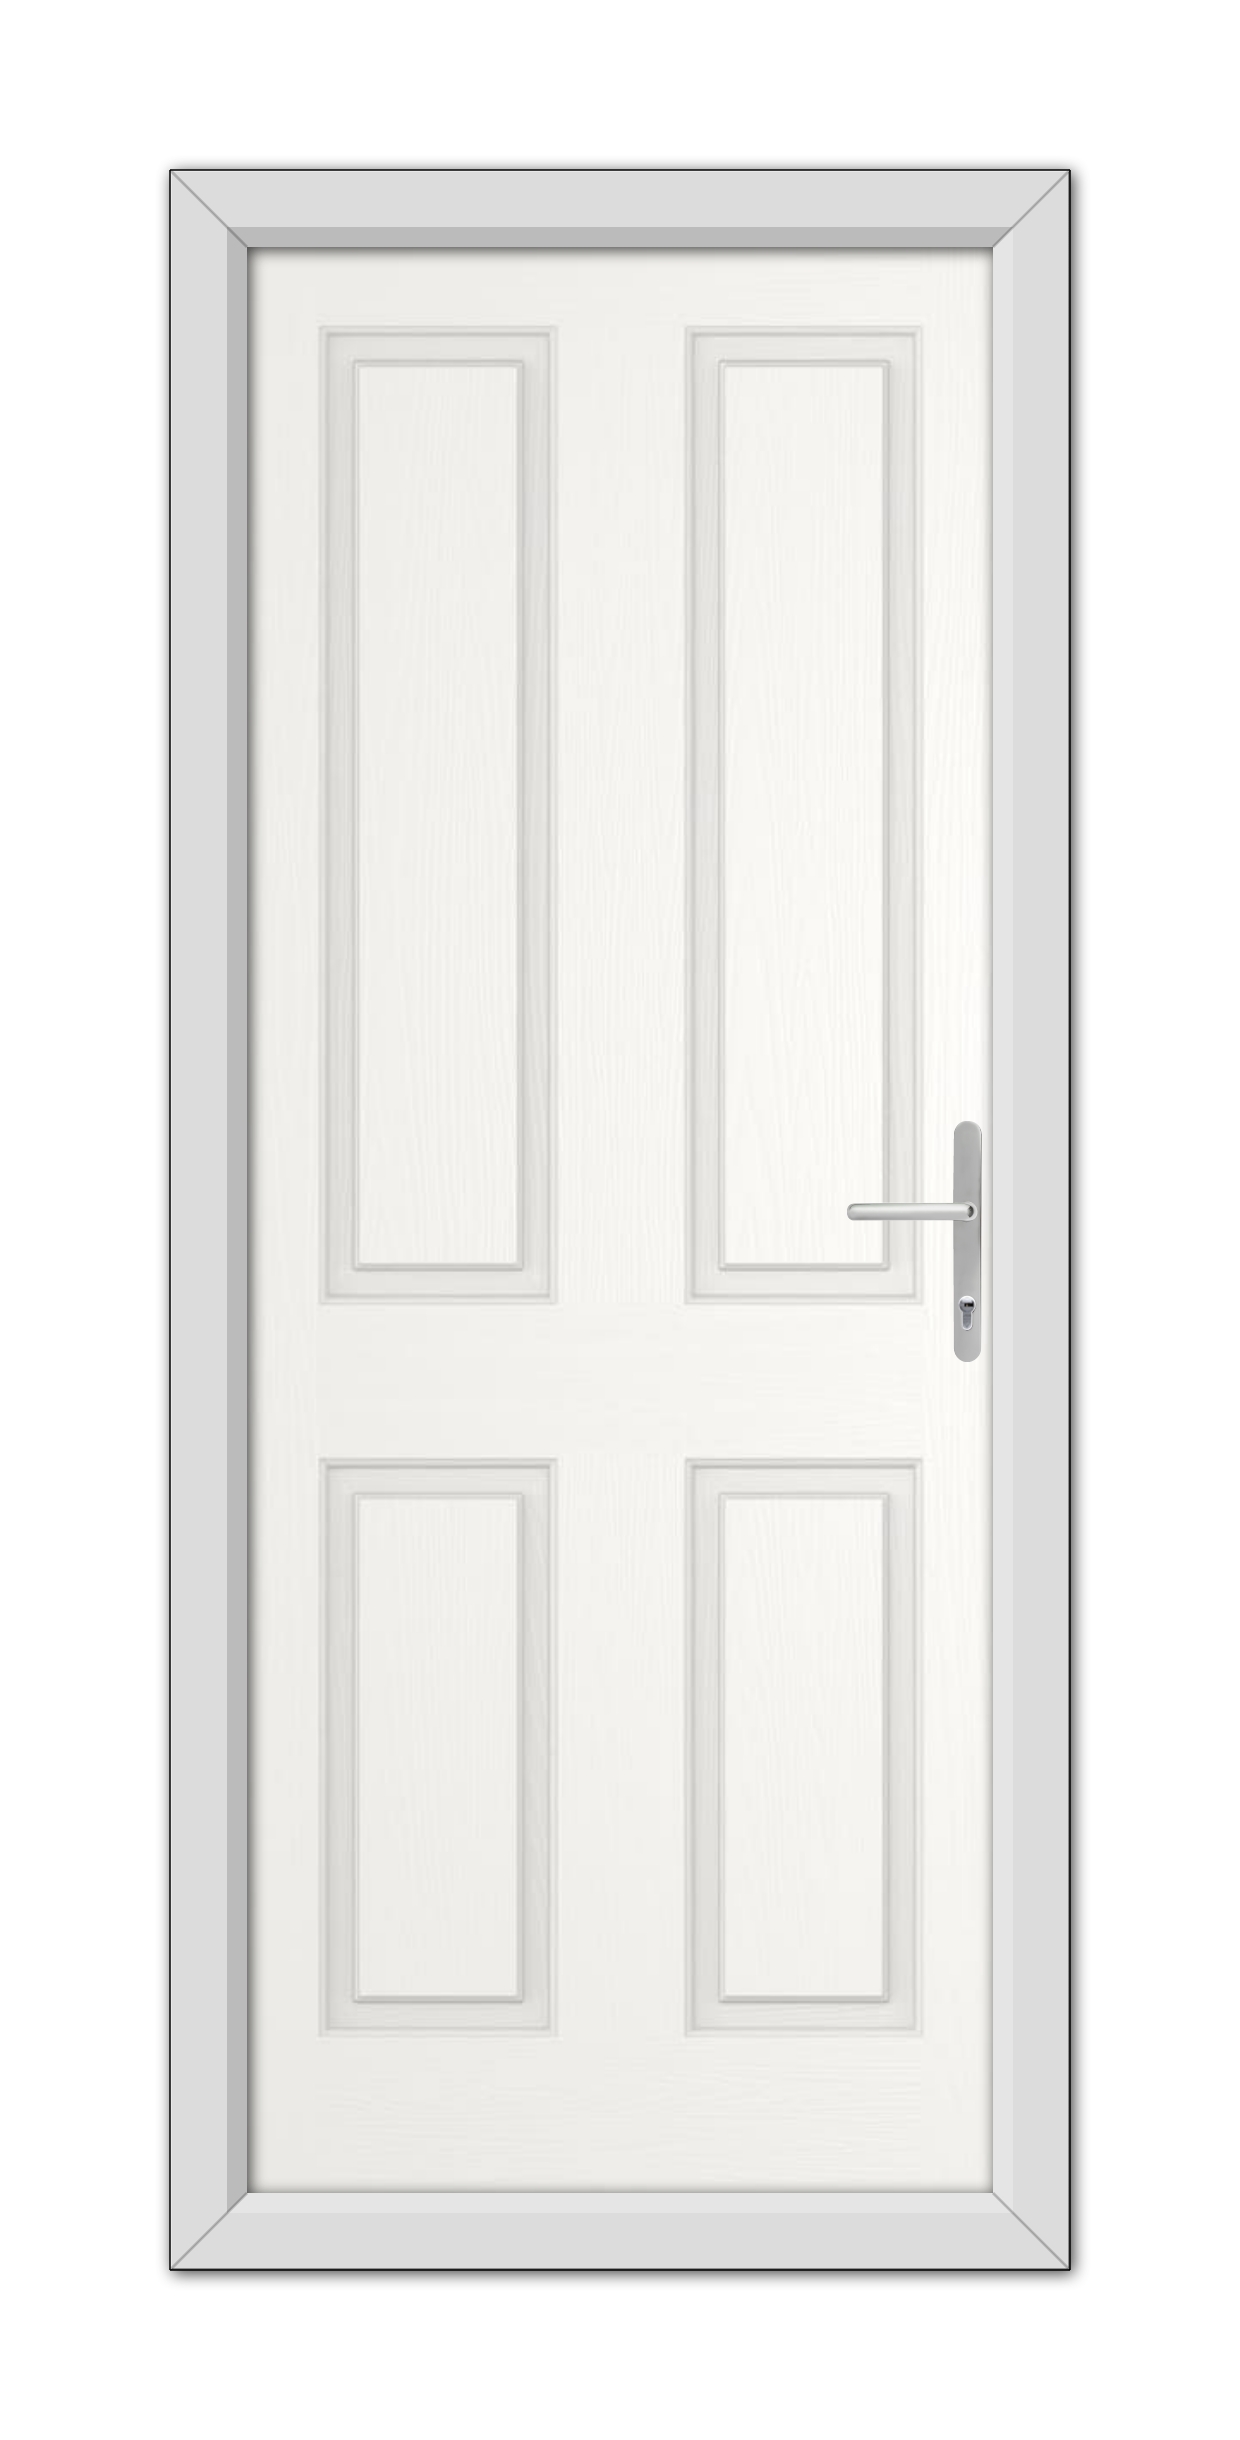 A White Whitmore Solid Composite Door 48mm Timber Core with a simple handle, each door featuring four rectangular panels, set in a gray frame.